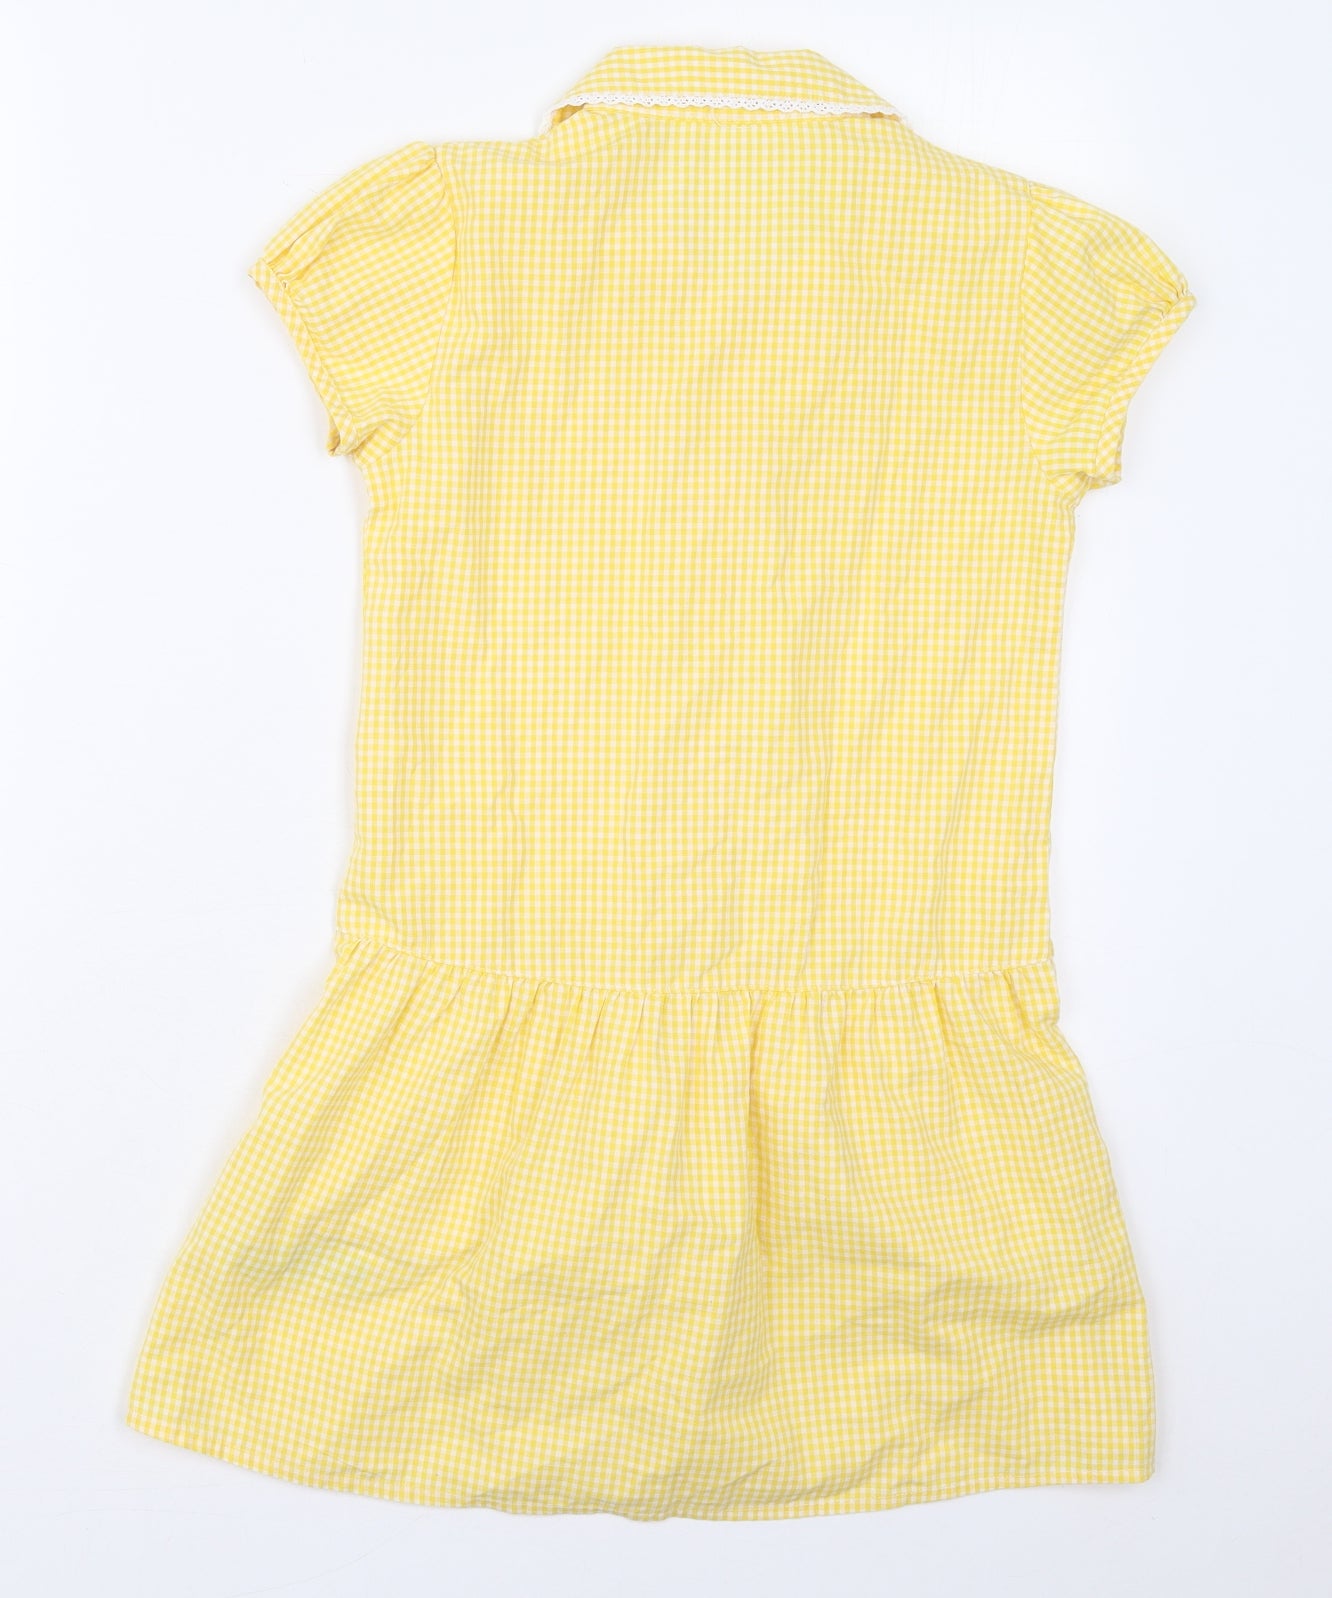 Marks and Spencer Girls Yellow Check Cotton Skater Dress  Size 8-9 Years  Collared Button